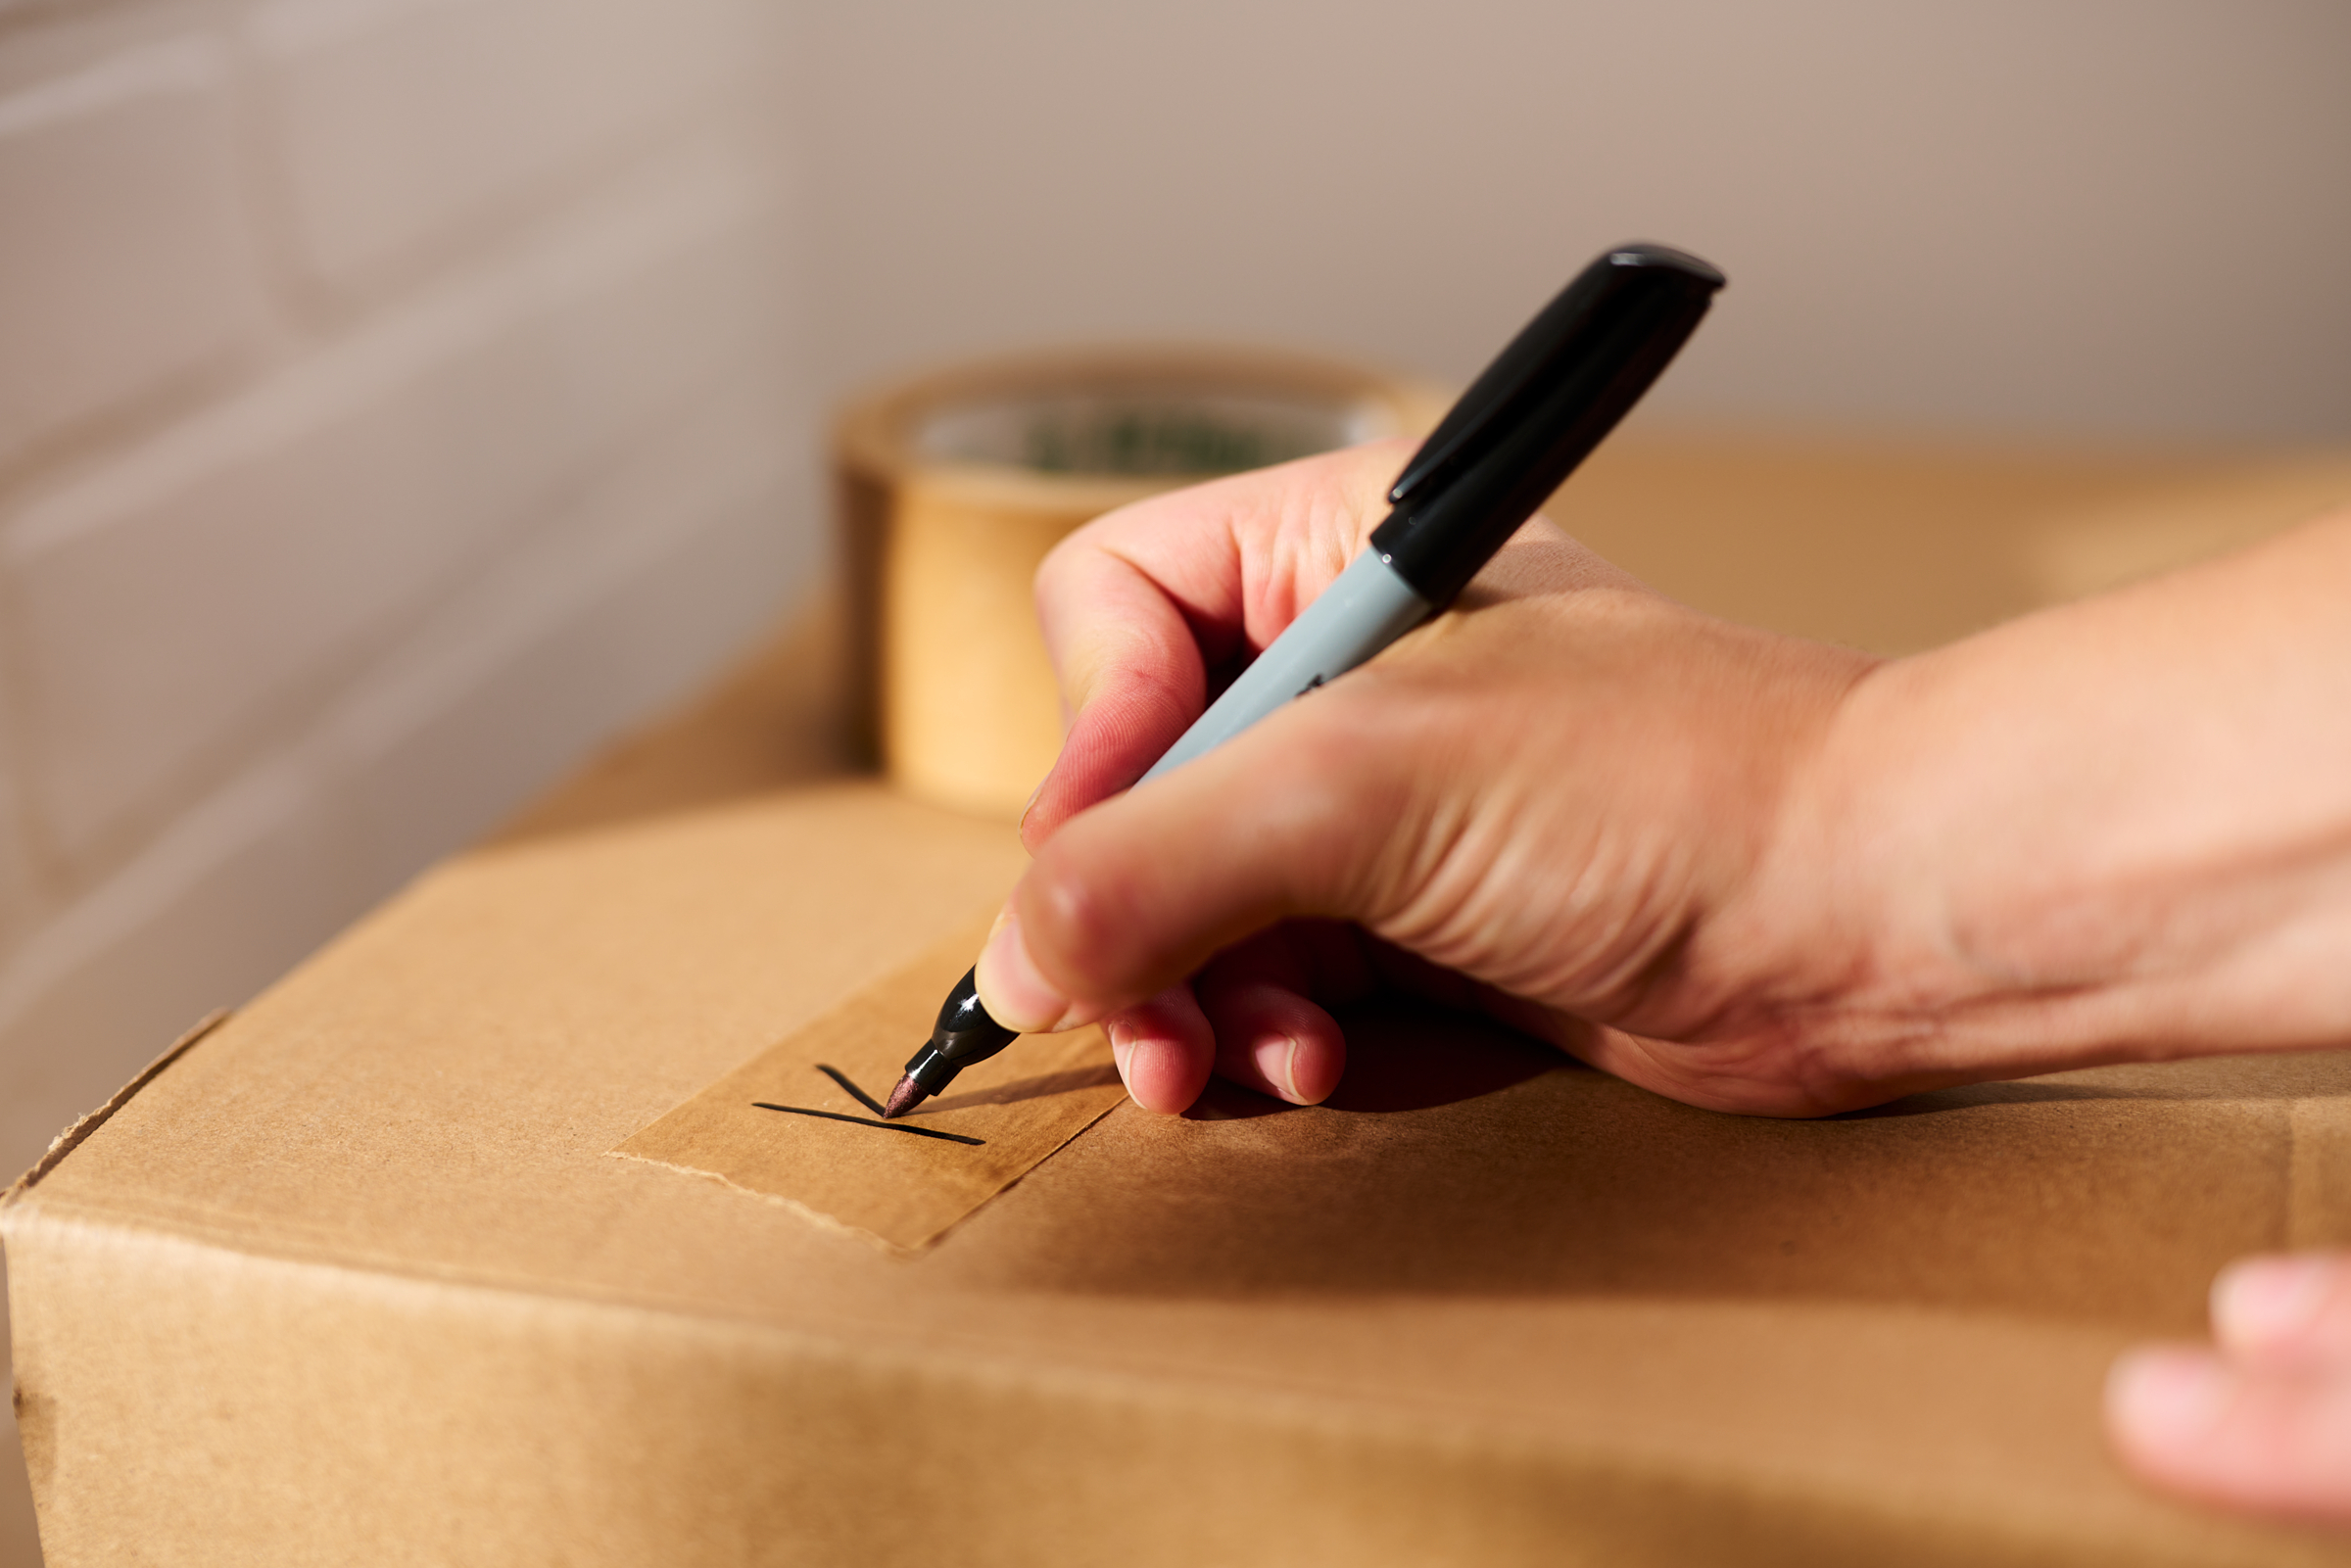 From Packing to Unpacking: A Guide to Key Moving Products and Their Benefits